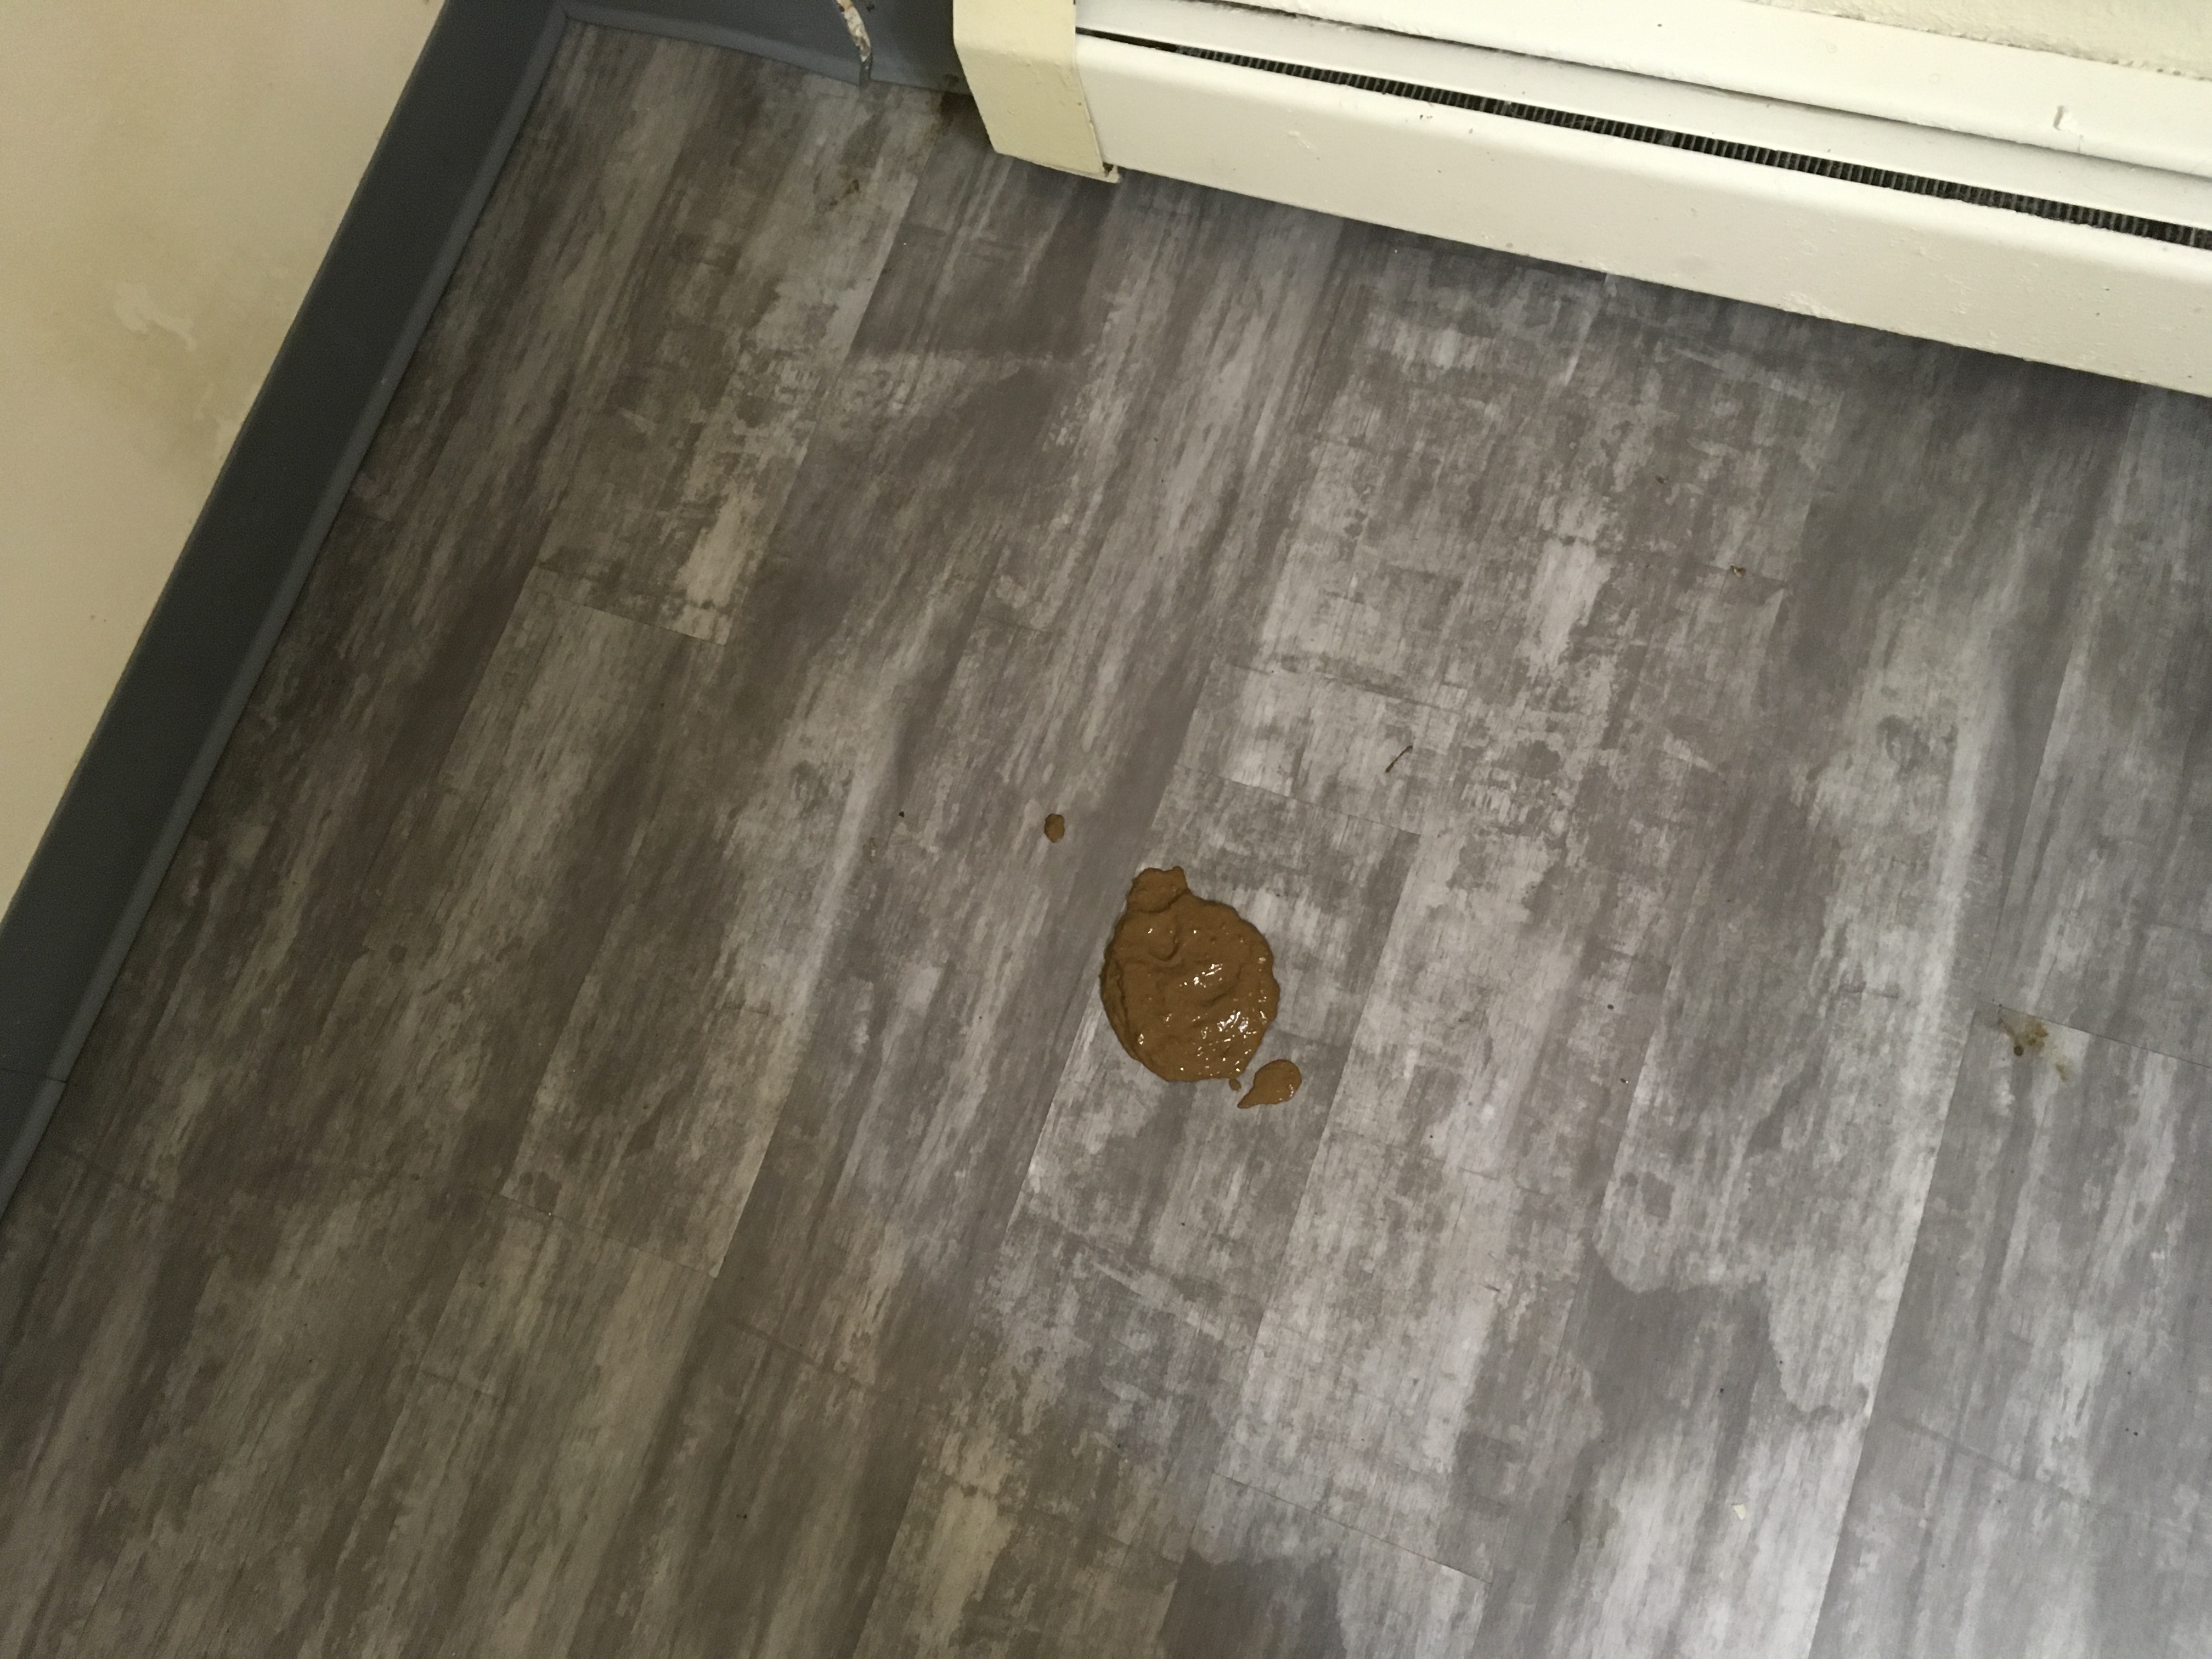 I took a shit on the floor again